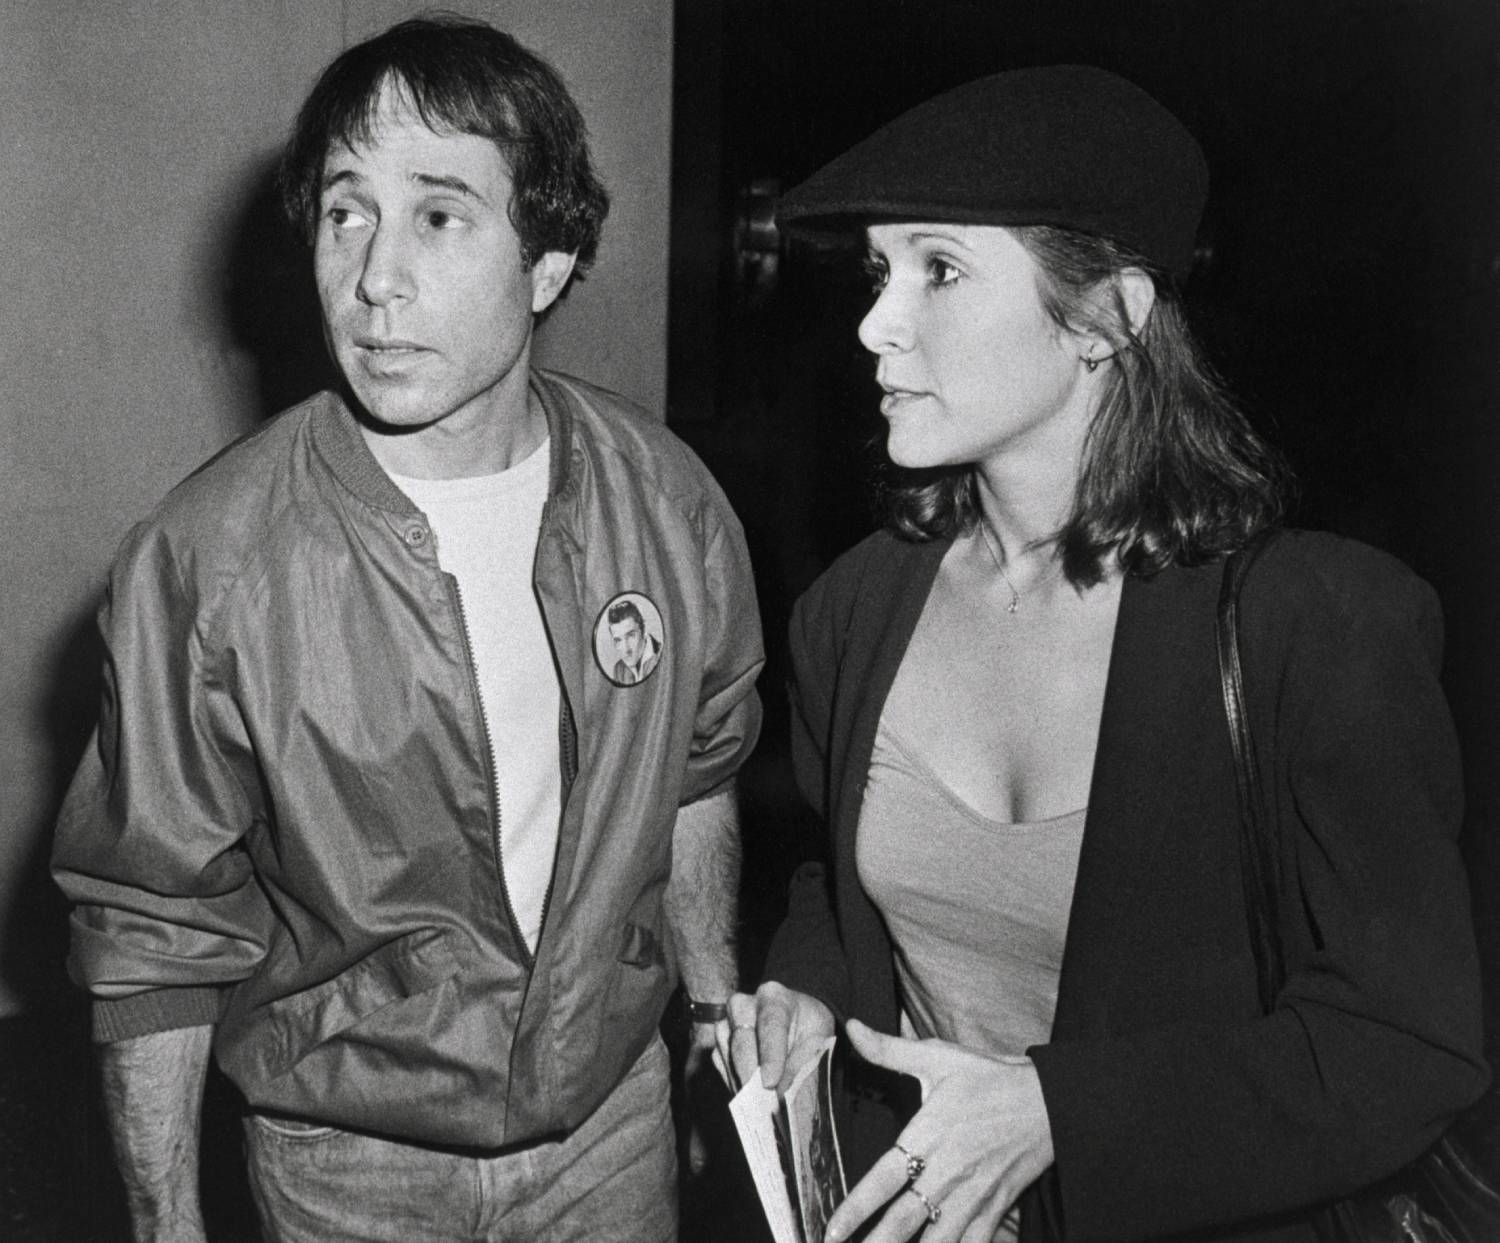 (Original Caption) 6/3/1980-New York: Singer-composer Paul Simon and actress Carrie Fisher at a reception following a private screening of the movie "Carney," which stars Gary Busey